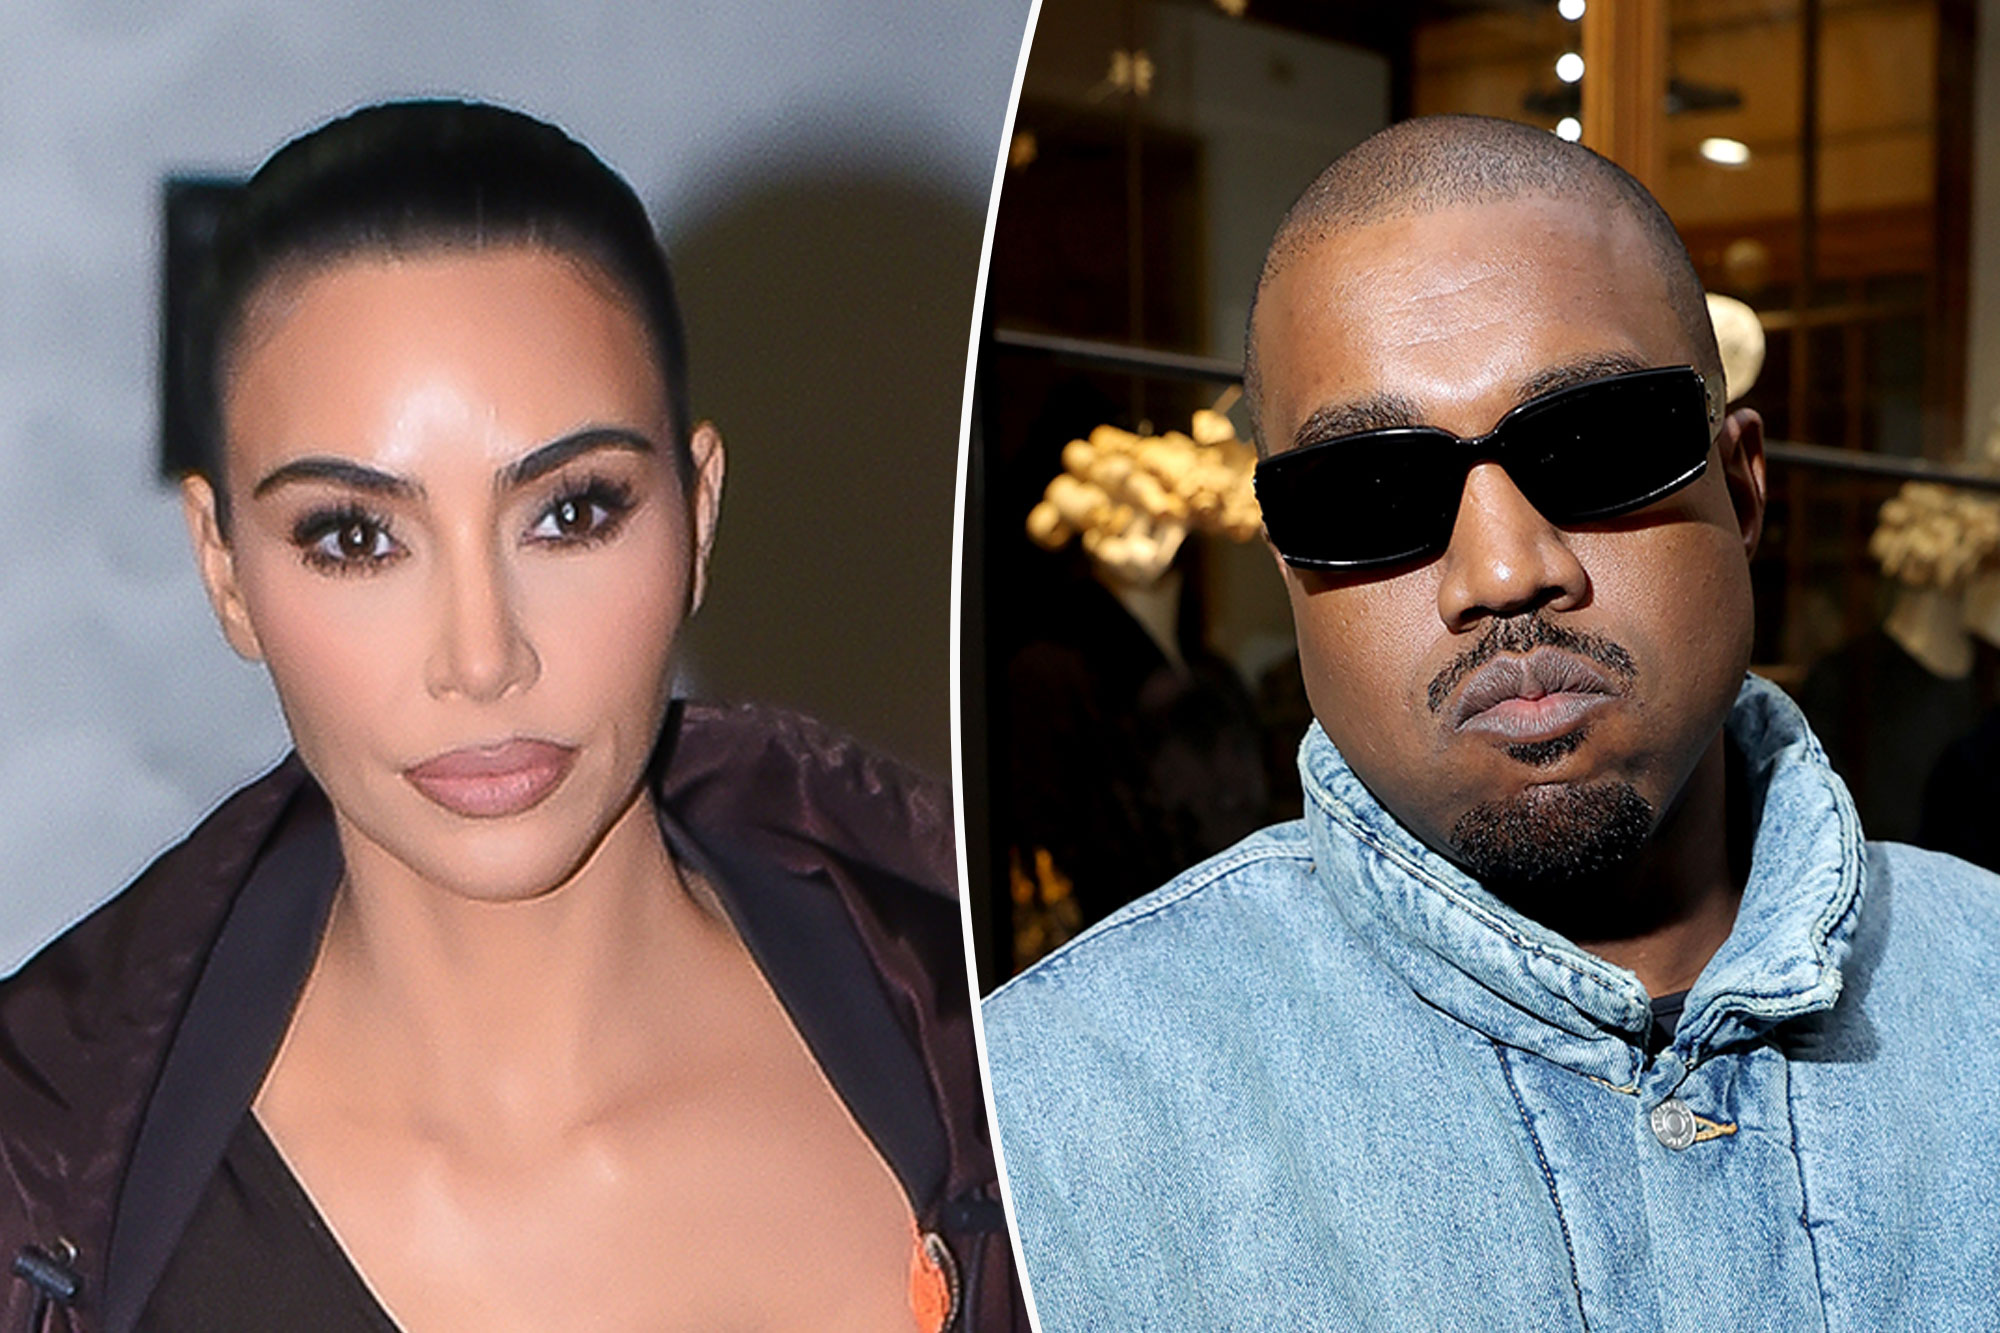 Kim Kardashian Is Not the Only One Upset by Kanye West's Instagram Post